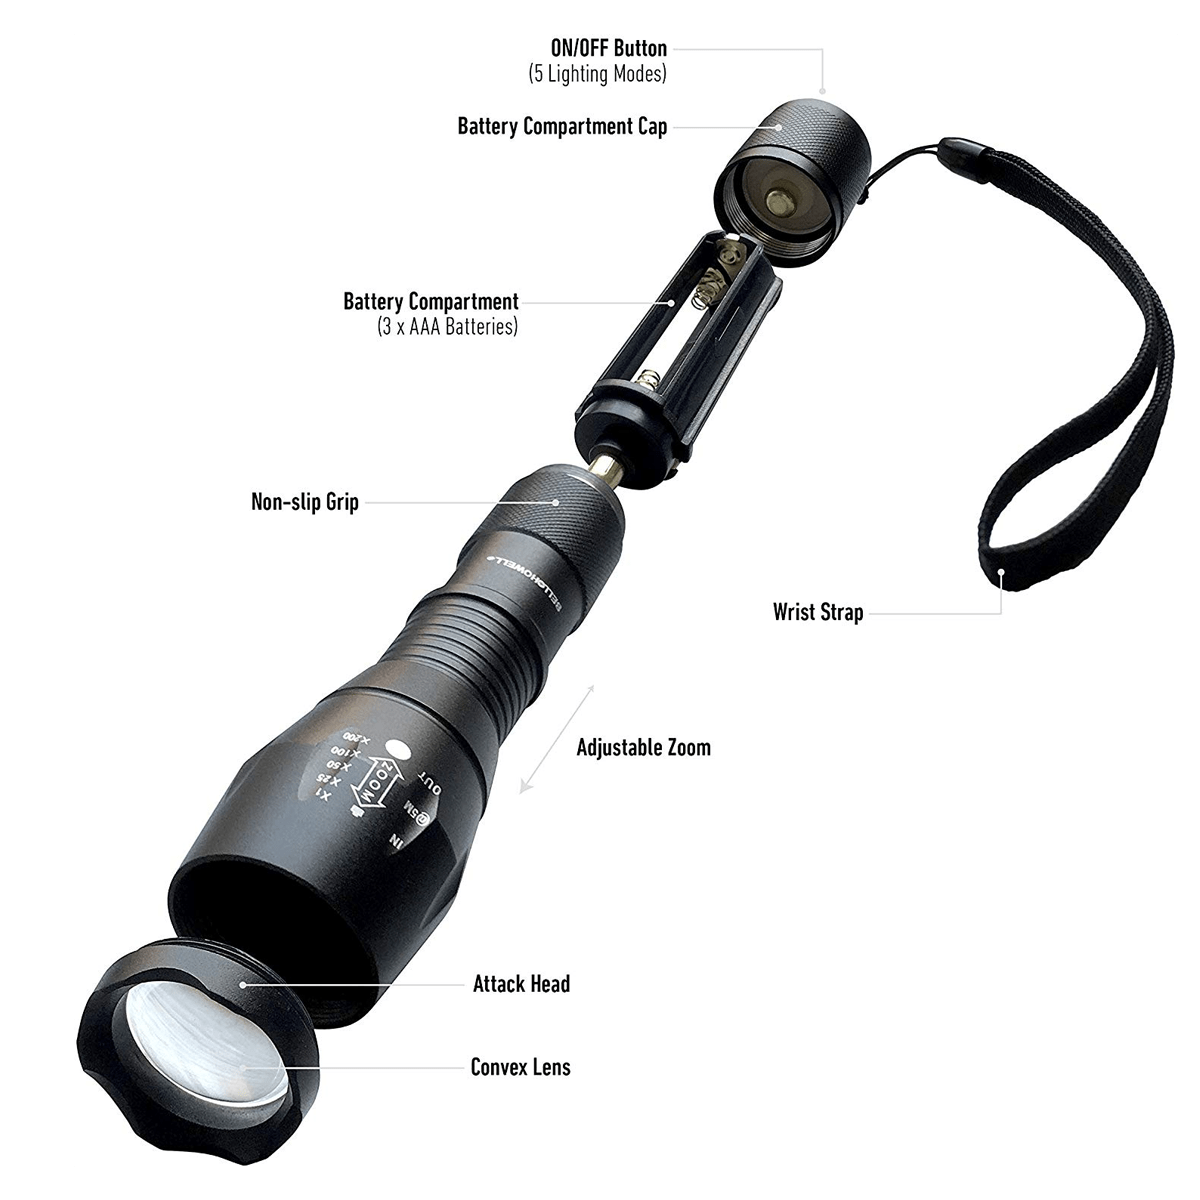 TACLIGHT PRO Lantern+Flashlight in-1 with Zoom, Magnetic Base - As Seen On TV